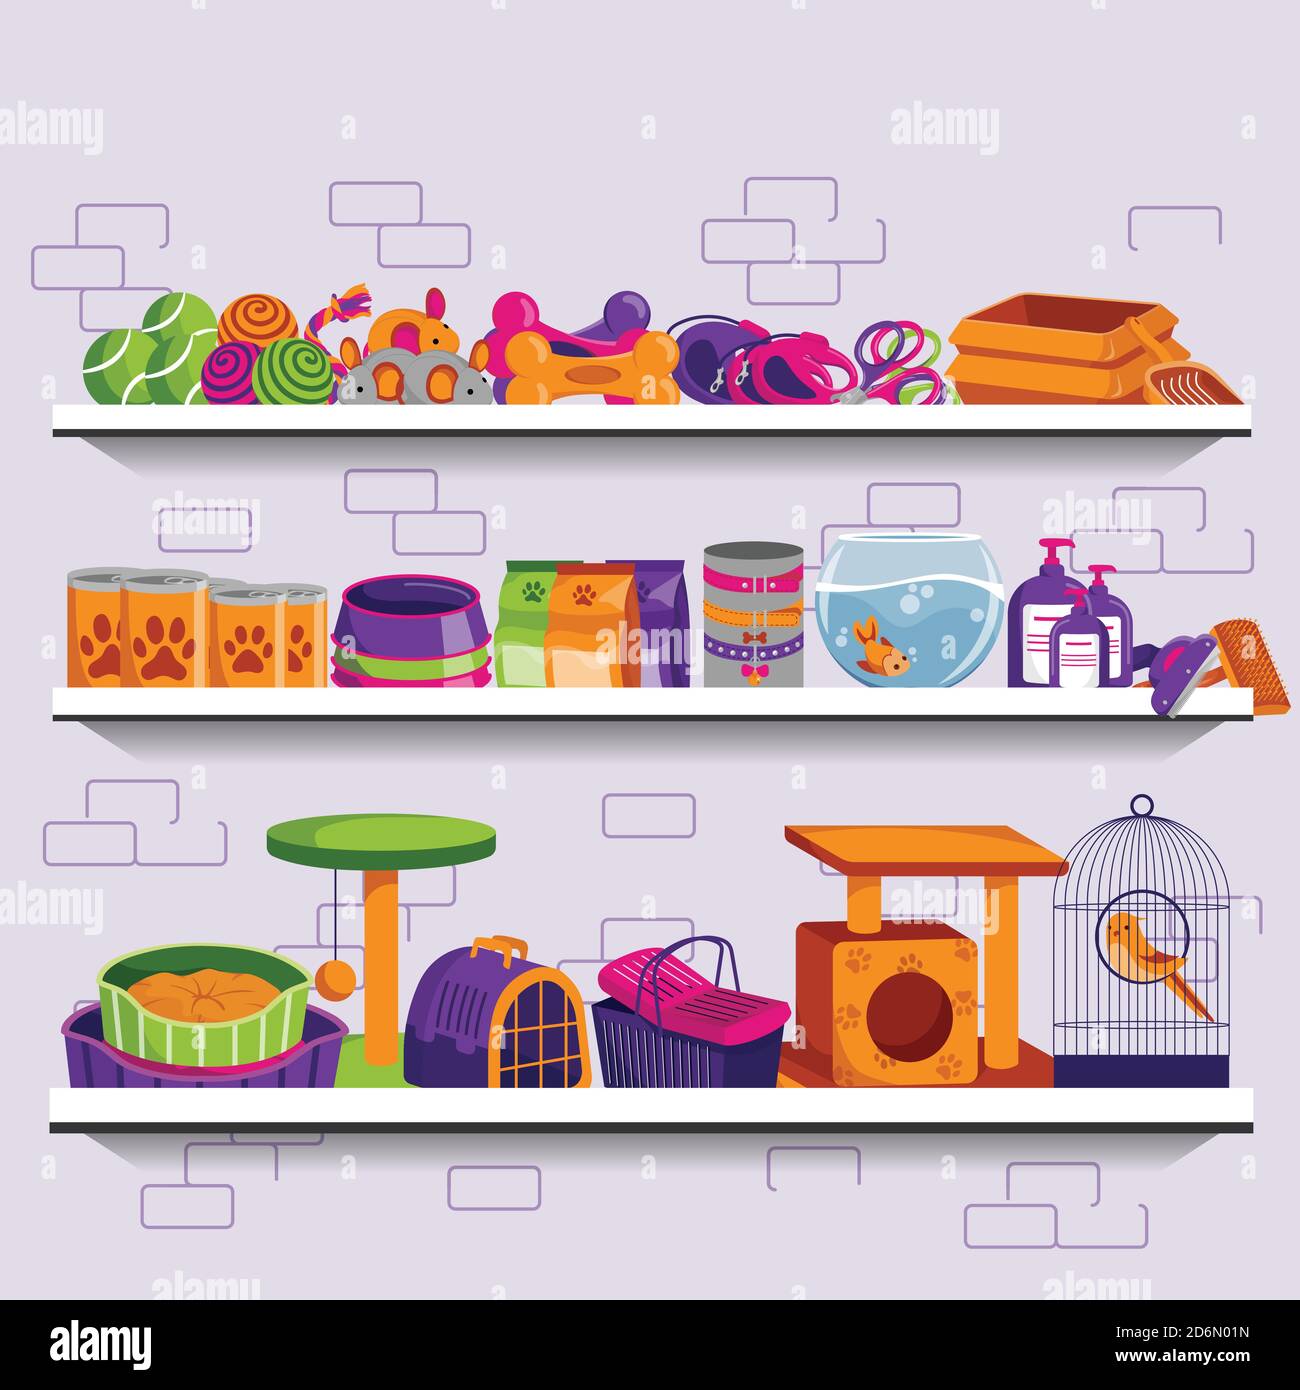 Pet shop vector illustration. Market shelves with food, supplies, accessories and toys for dogs and cats. Banner, flyer or poster flat background. Stock Vector